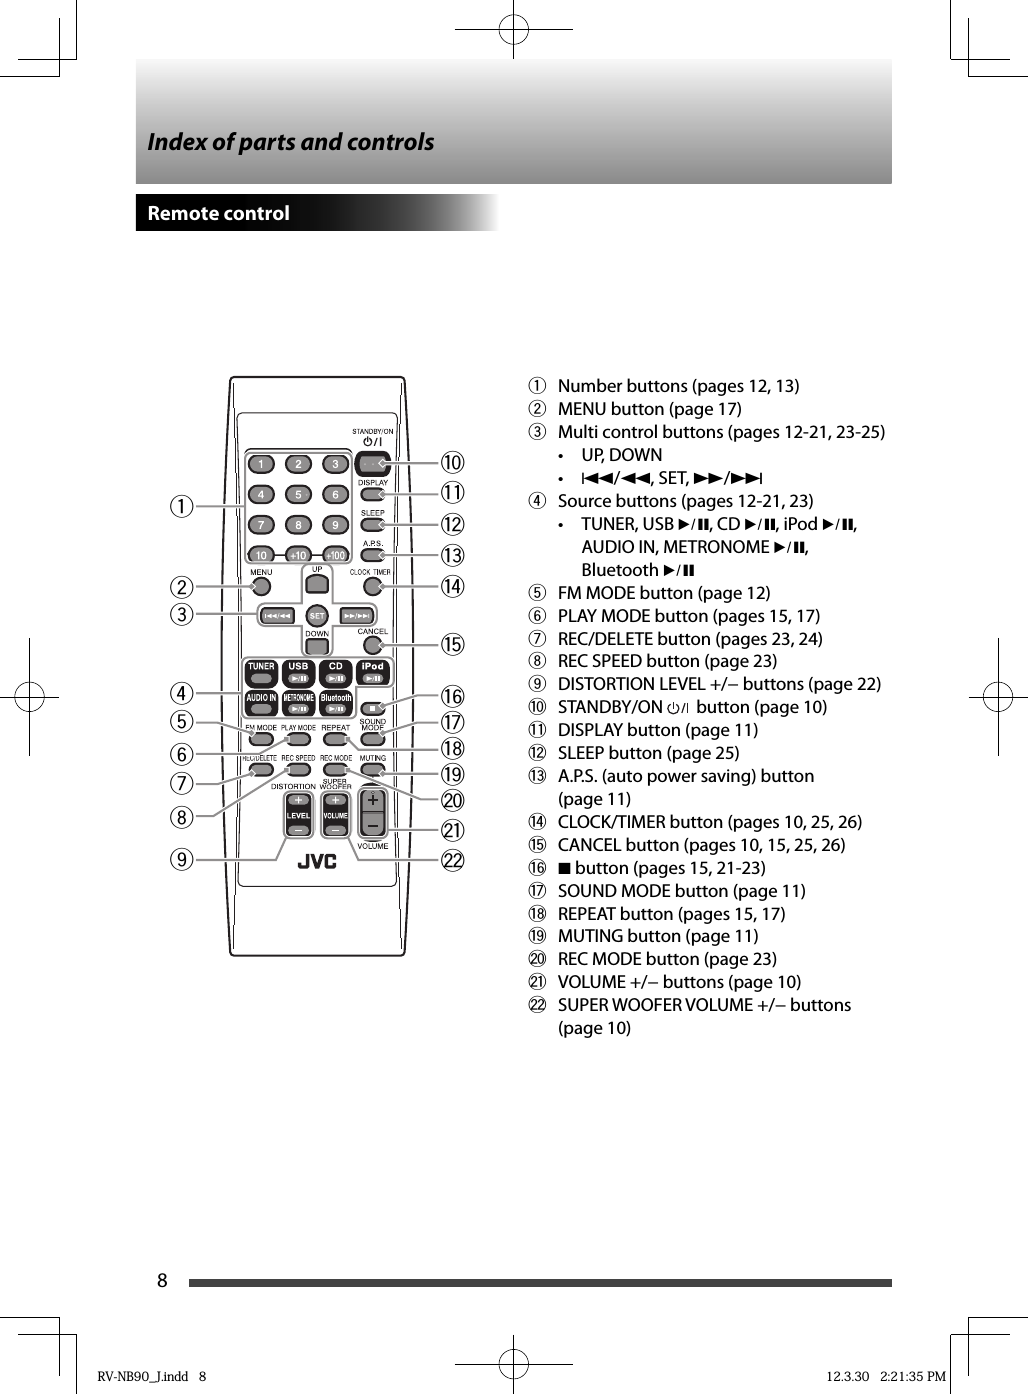 8Index of parts and controlsRemote control1122334455678990-=~!@#$%^&amp;*(1  Number buttons (pages 12, 13)2  MENU button (page 17)3  Multi control buttons (pages 12-21, 23-25) UP, DOWN •  •  4/1, SET, ¡/¢4  Source buttons (pages 12-21, 23) TUNER, USB •  6, CD 6, iPod 6, AUDIO IN, METRONOME 6, Bluetooth 65  FM MODE button (page 12)6  PLAY MODE button (pages 15, 17)7  REC/DELETE button (pages 23, 24)8  REC SPEED button (page 23)9  DISTORTION LEVEL +/− buttons (page 22)0 STANDBY/ON   button (page 10)-  DISPLAY button (page 11)=  SLEEP button (page 25)~  A.P.S. (auto power saving) button (page 11)!  CLOCK/TIMER button (pages 10, 25, 26)@  CANCEL button (pages 10, 15, 25, 26)# 7 button (pages 15, 21-23)$  SOUND MODE button (page 11)%  REPEAT button (pages 15, 17)^  MUTING button (page 11)&amp;  REC MODE button (page 23)*  VOLUME +/− buttons (page 10)(  SUPER WOOFER VOLUME +/− buttons (page 10)RV-NB90_J.indd   8RV-NB90_J.indd   8 12.3.30   2:21:35 PM12.3.30   2:21:35 PM